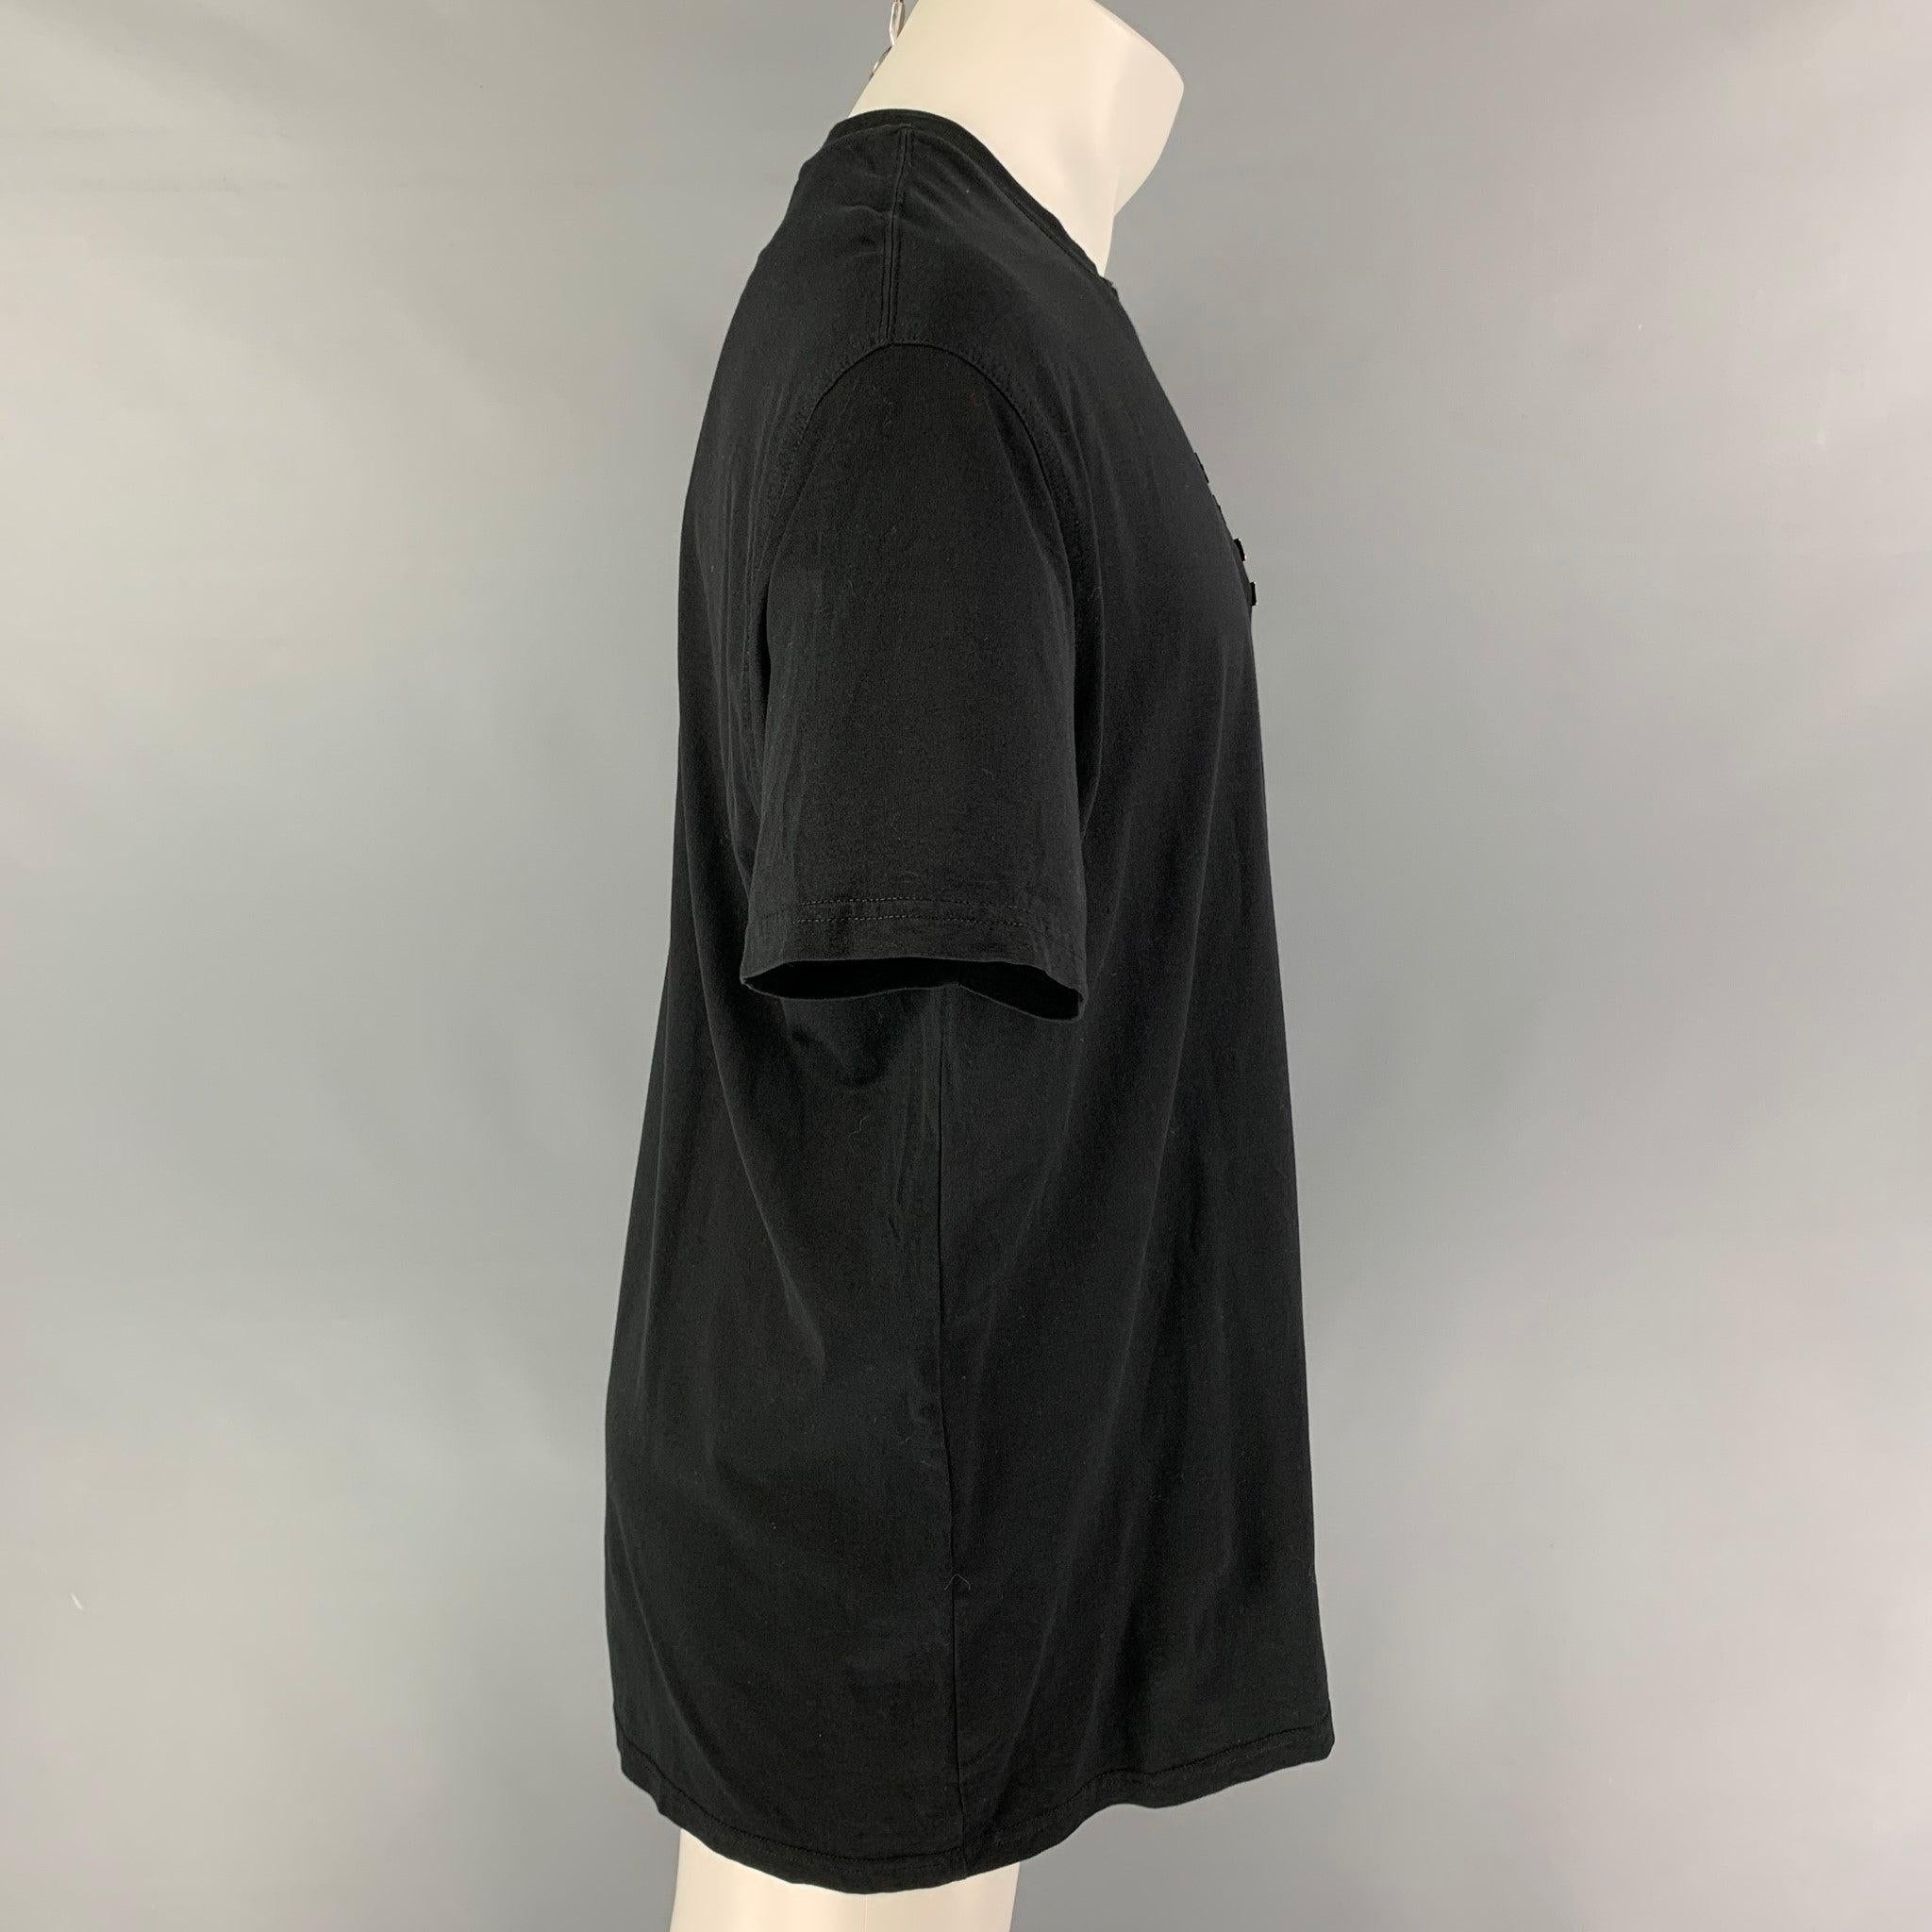 GIVENCHY t-shirt comes in a black cotton featuring front metal plaques, oversized fit, and a crew-neck. Made in Portugal.
Very Good
Pre-Owned Condition. 

Marked:   S 

Measurements: 
 
Shoulder: 21 inches  Chest: 46 inches  Sleeve: 9 inches 